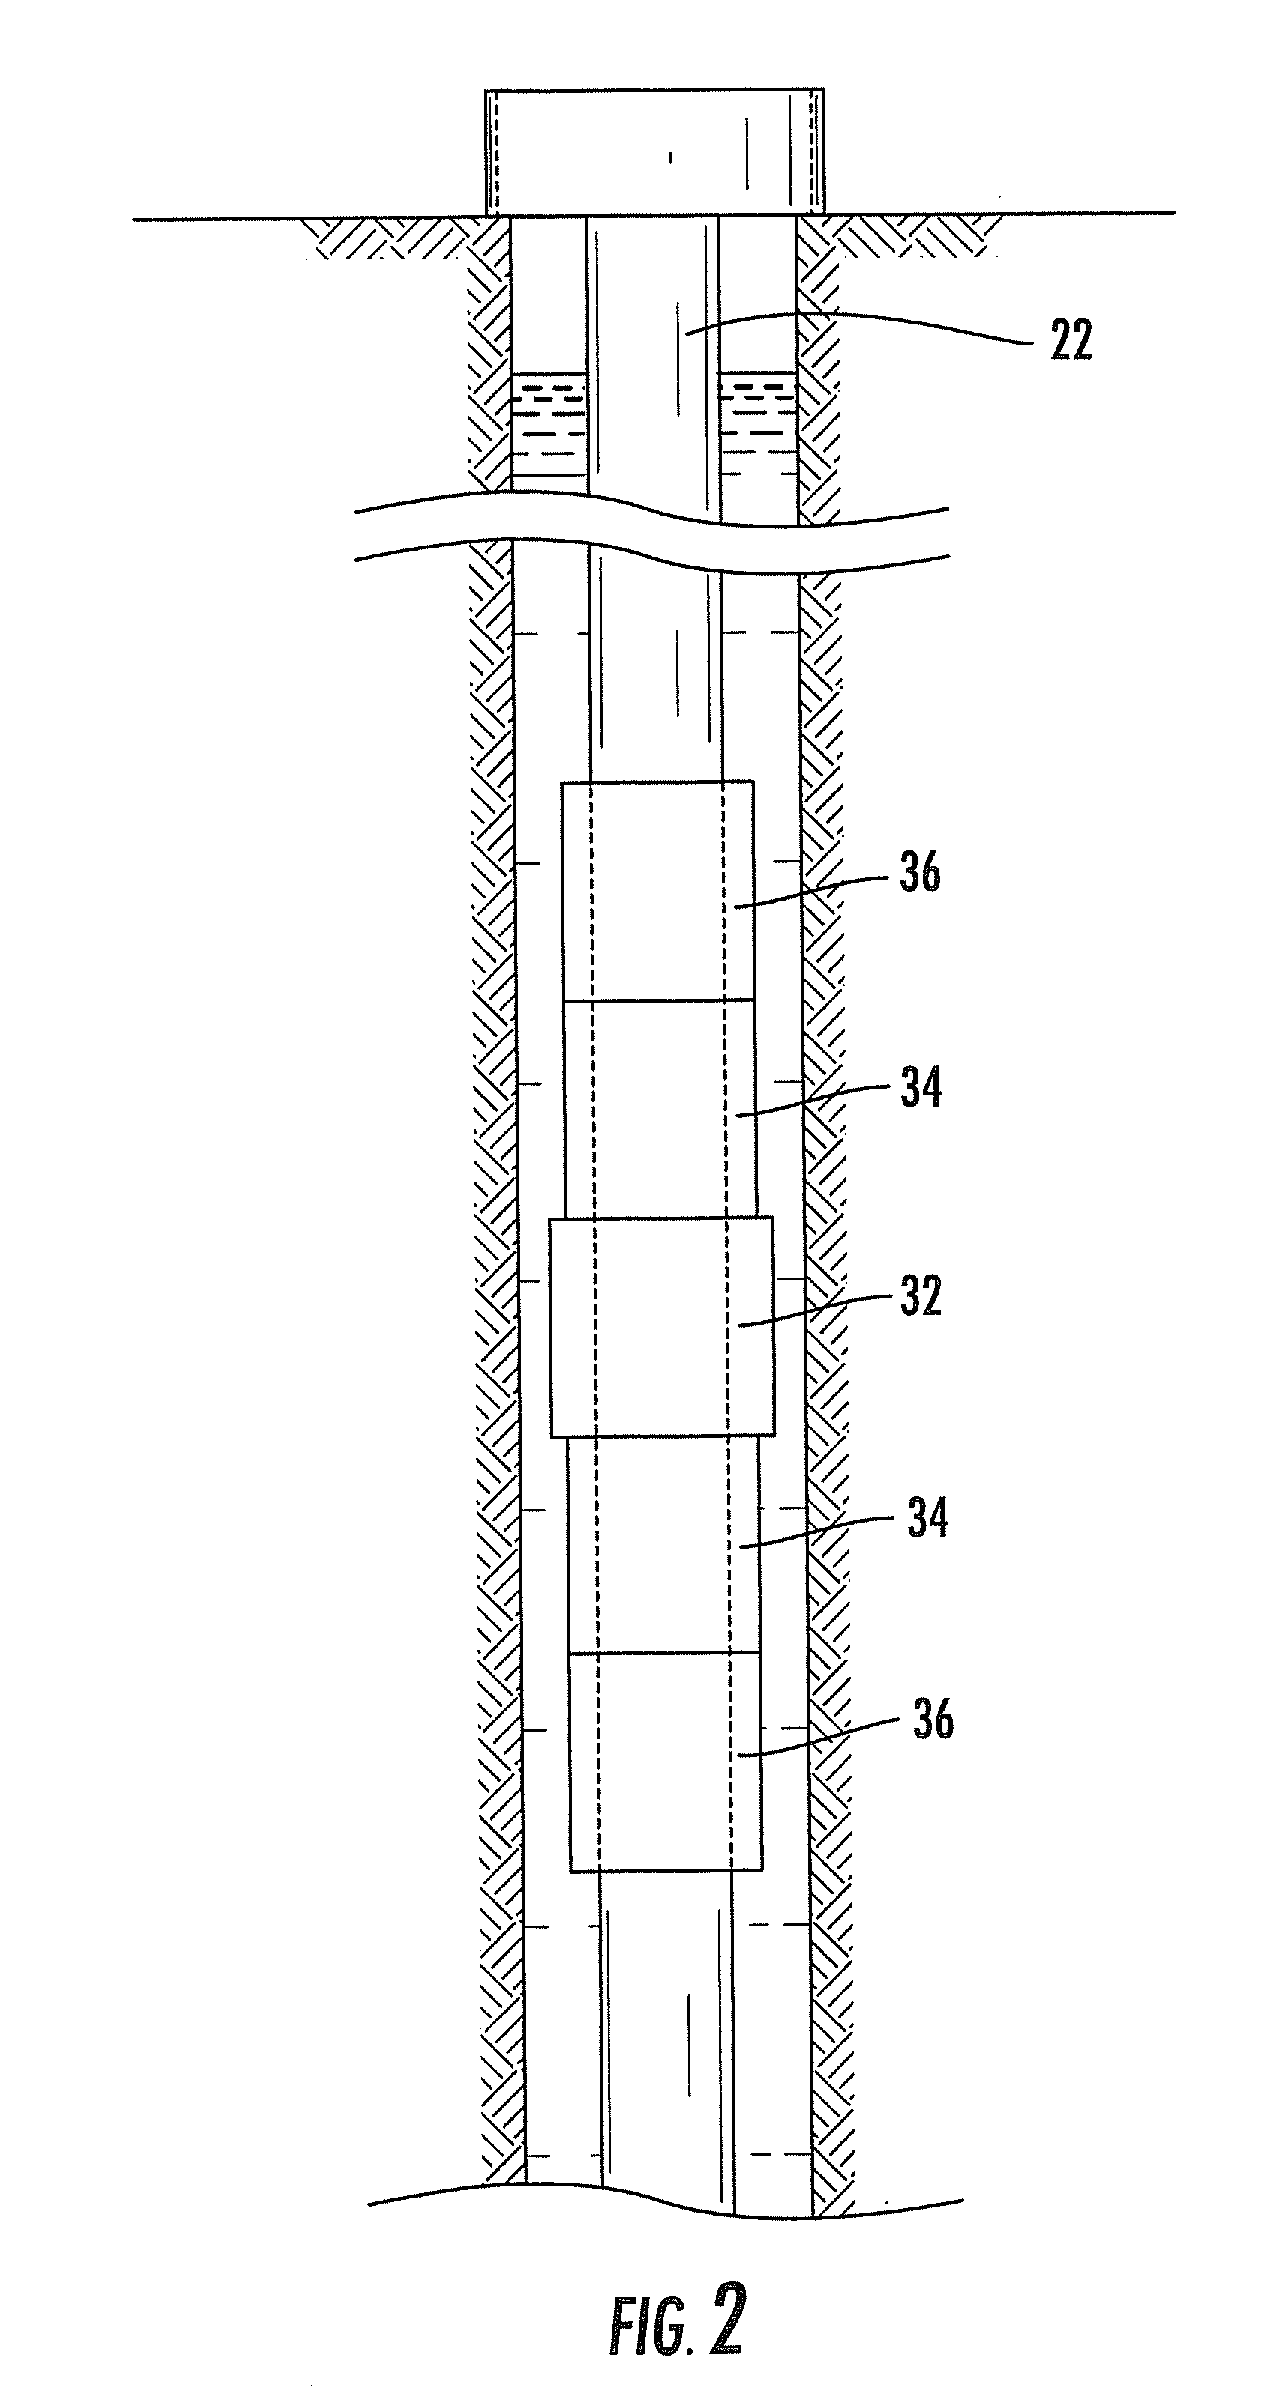 Downwell system with differentially swellable packer